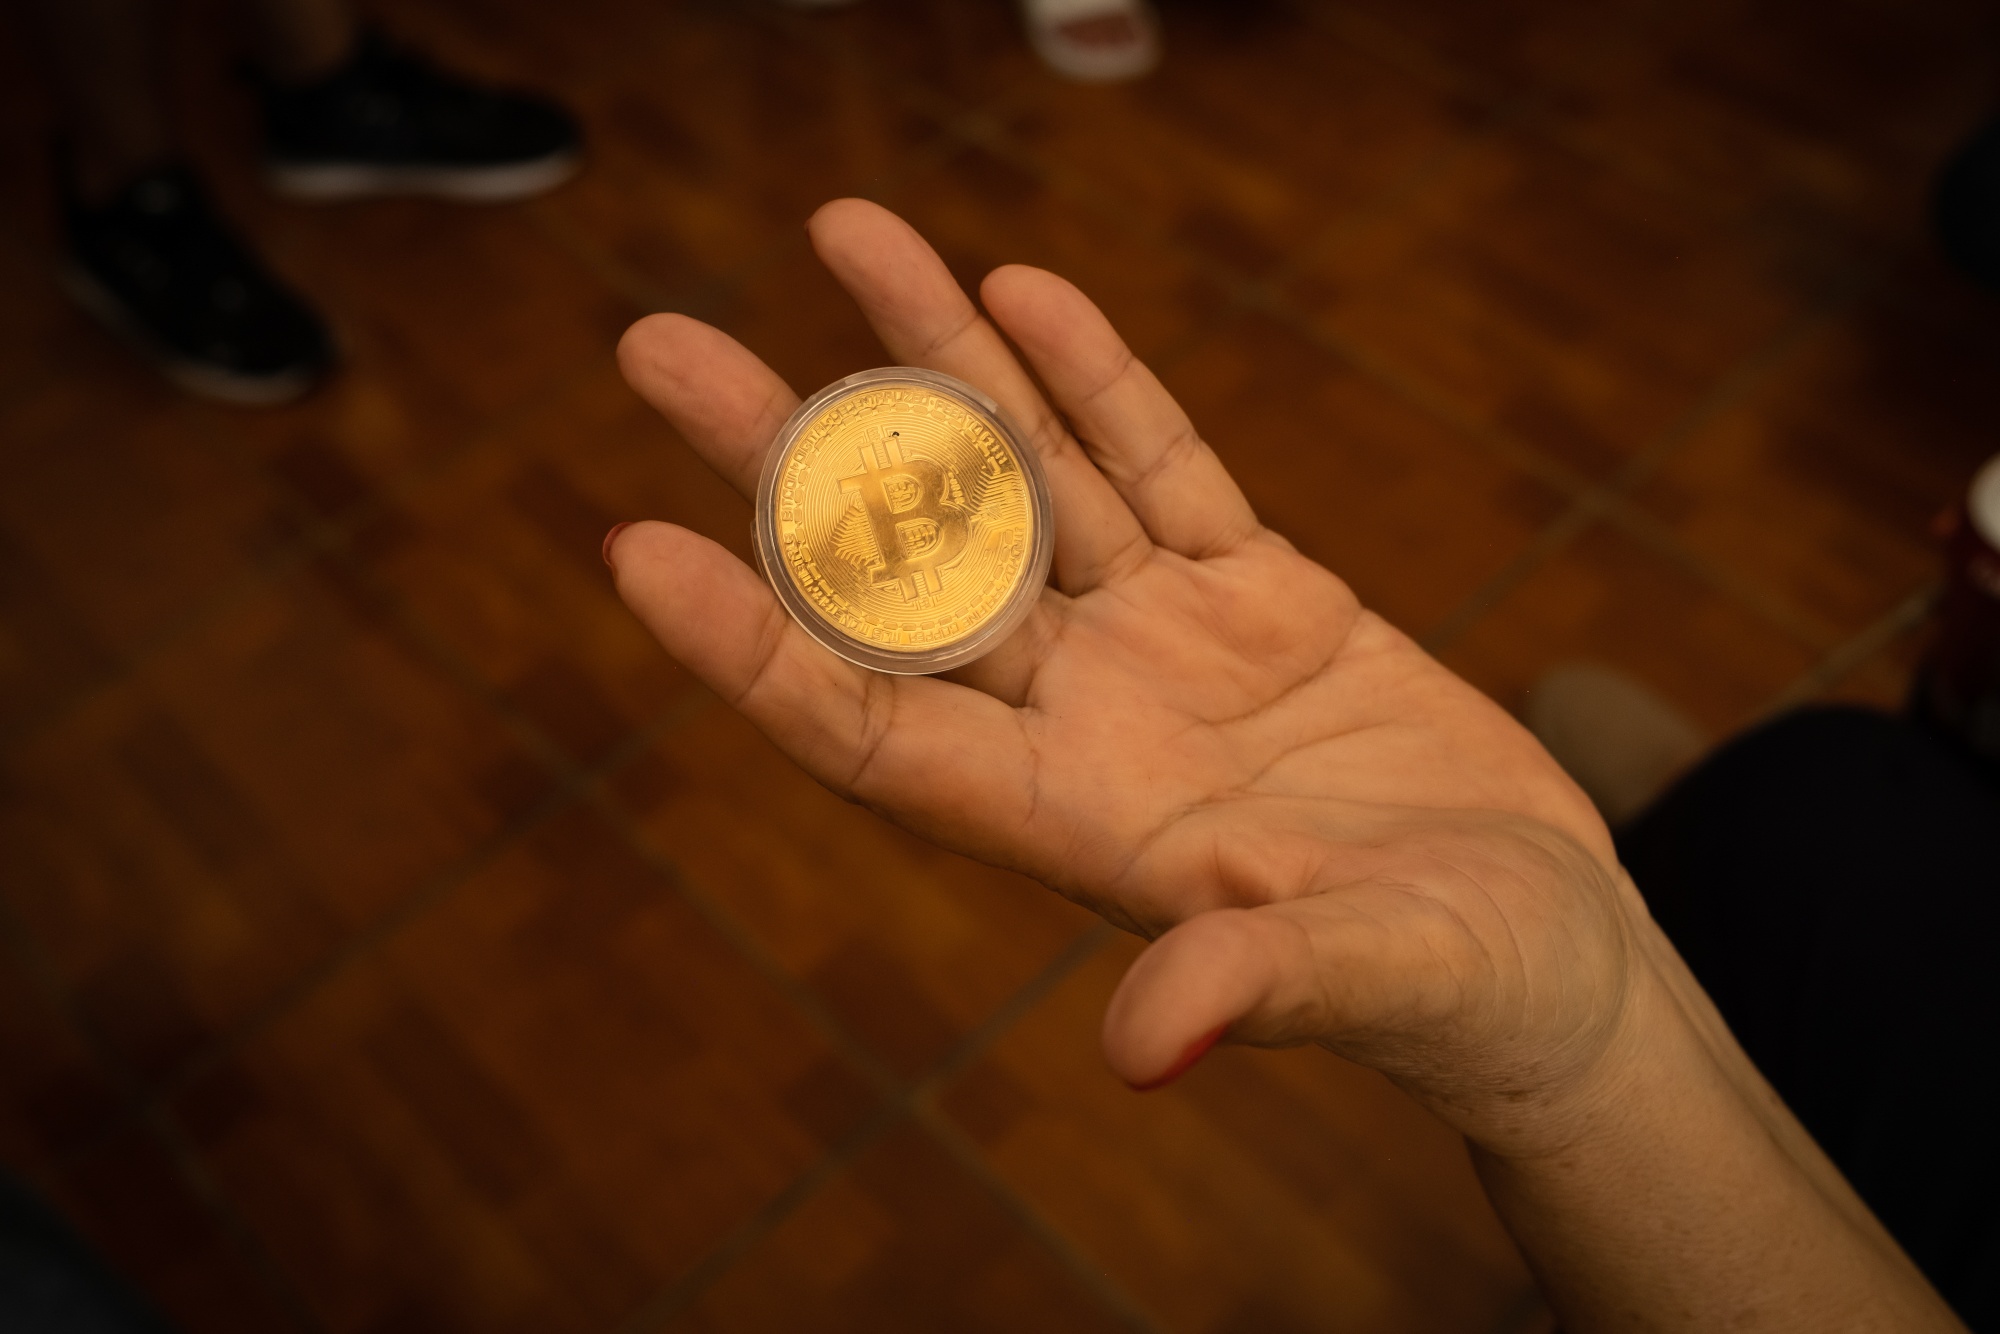 Bitcoin’s rollout in El Salvador wasn’t without glitches. Now comes the bigger test.